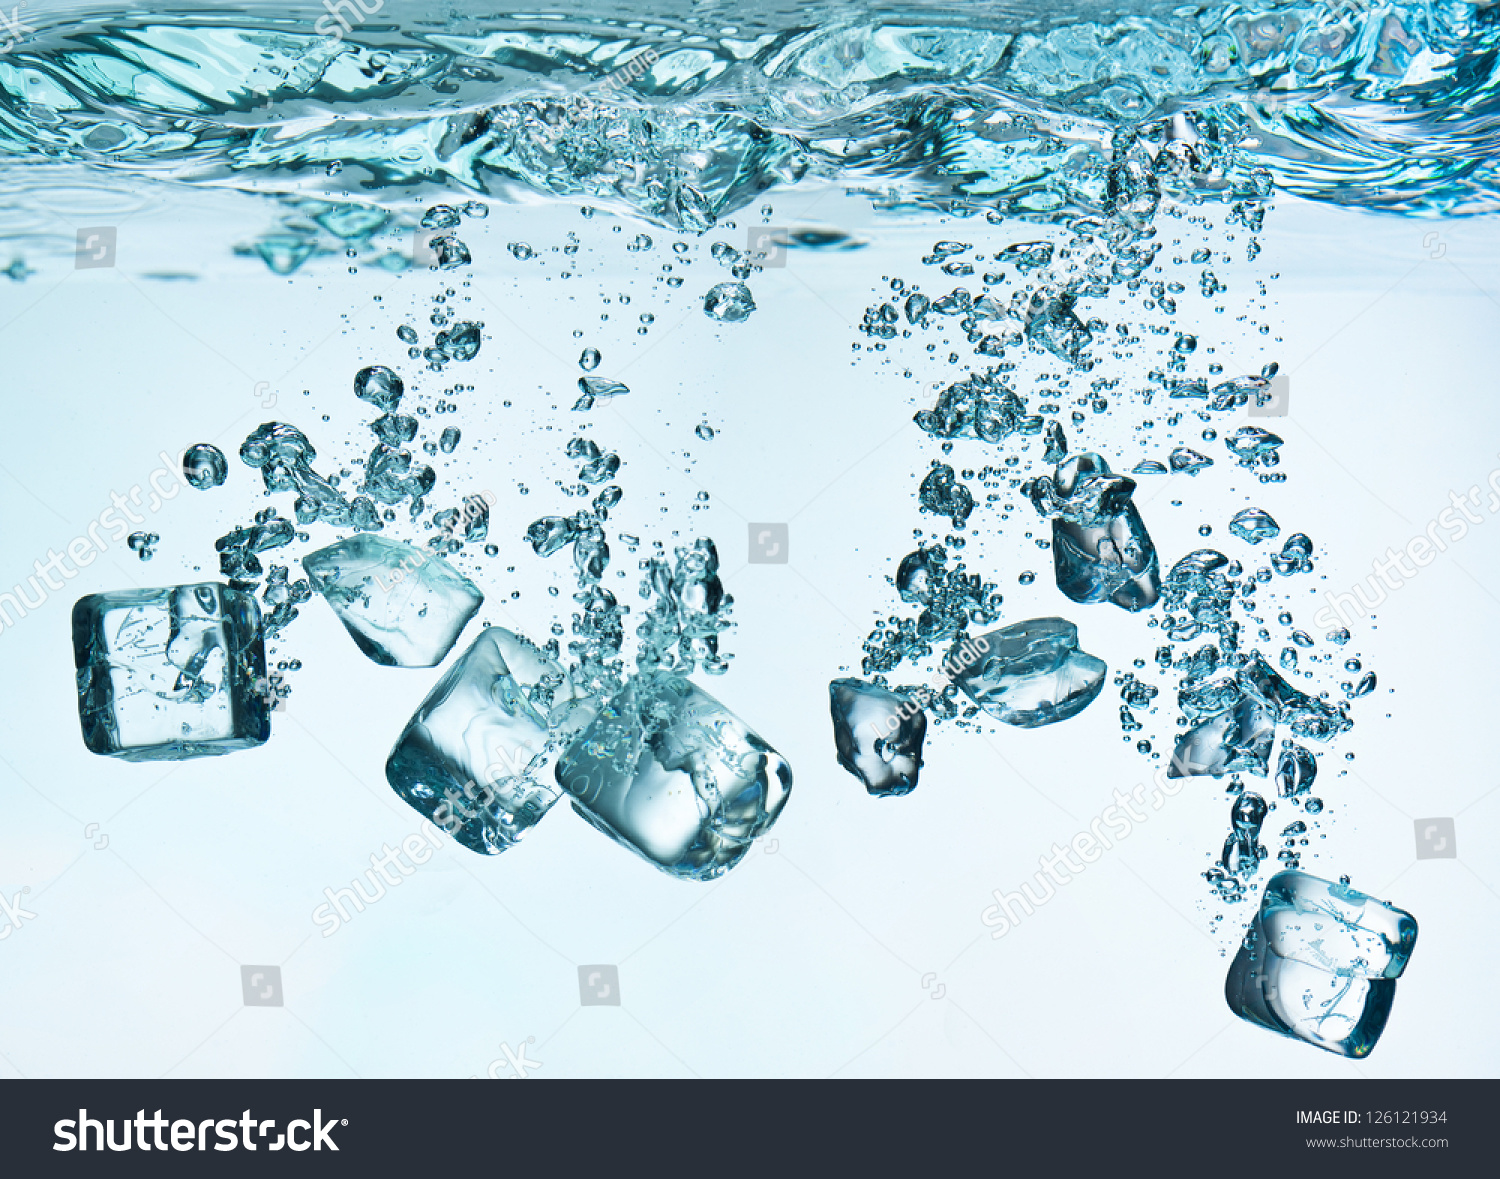 http://image.shutterstock.com/z/stock-photo-close-up-view-of-the-ice-cubes-in-water-126121934.jpg